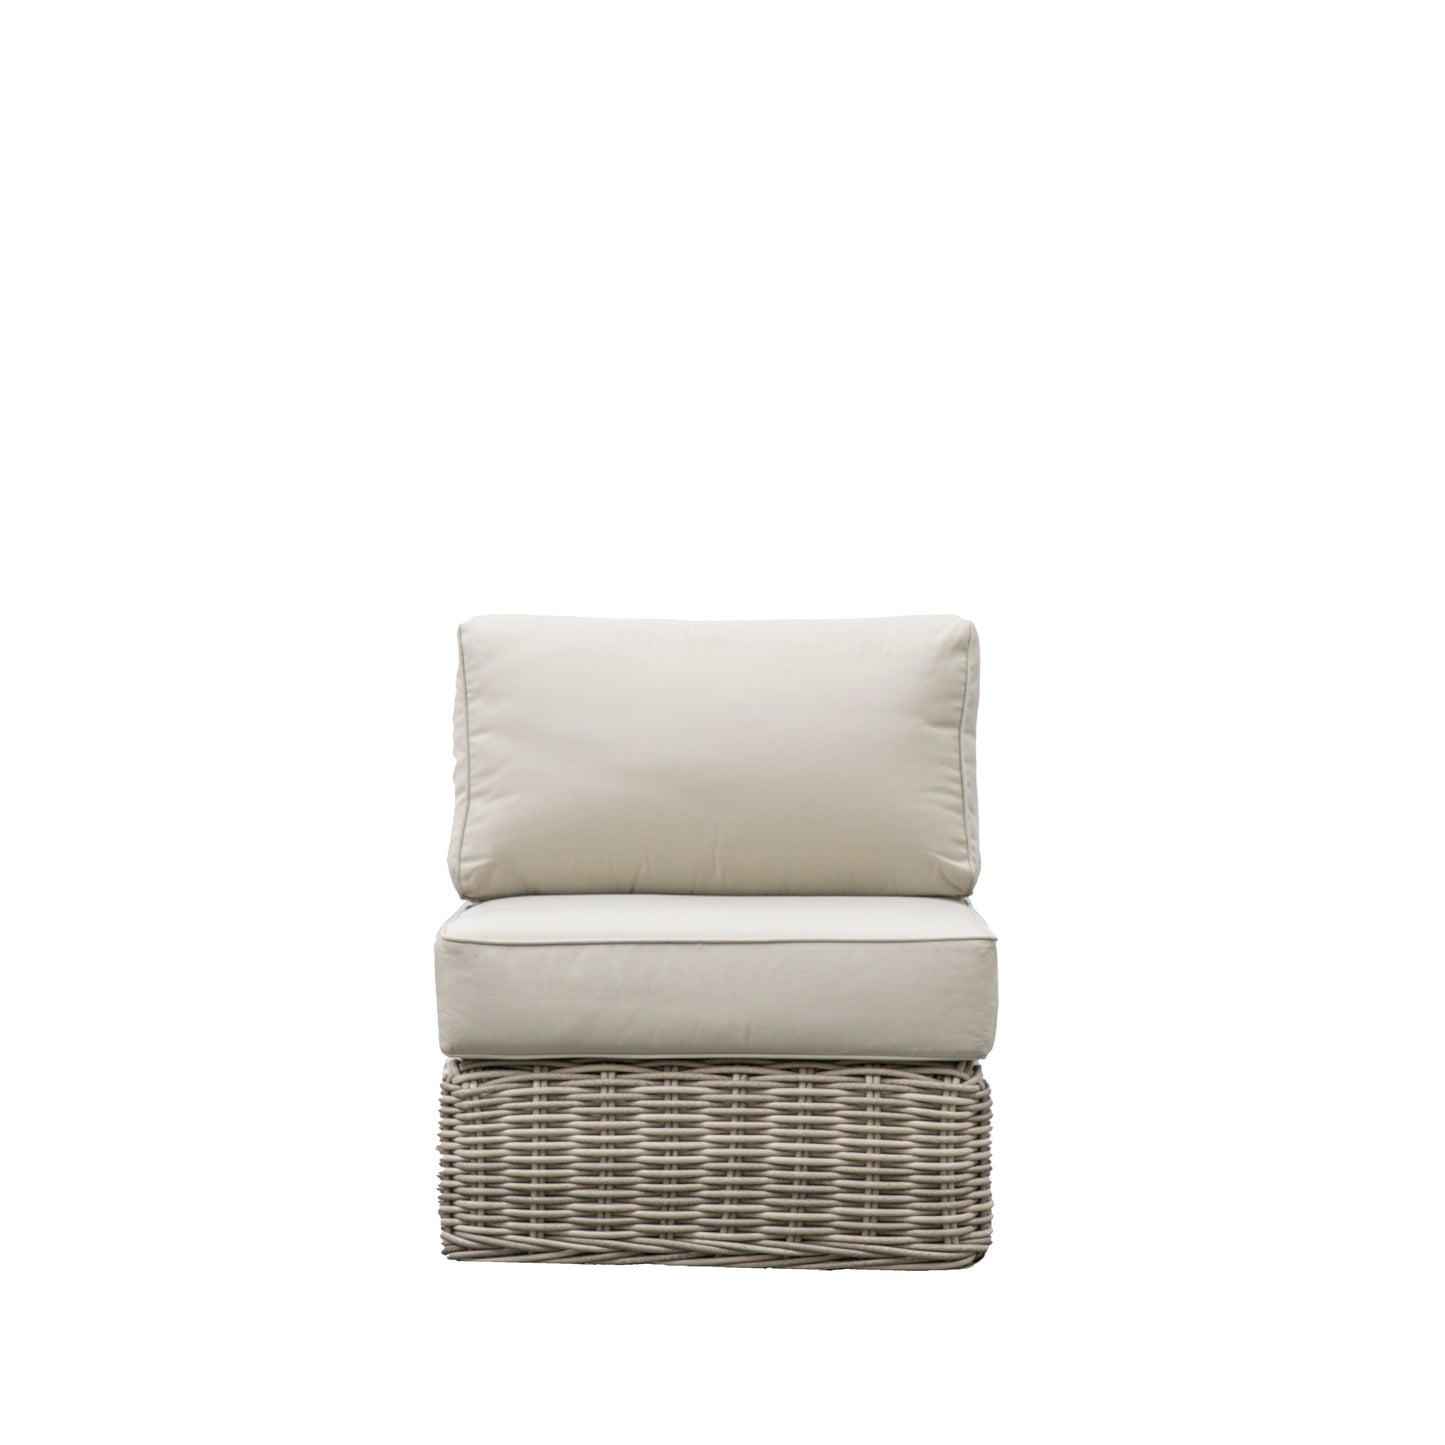 A Churchstow 1 Seater Module by Kikiathome.co.uk with a cushion, ideal for interior decor and home furniture.